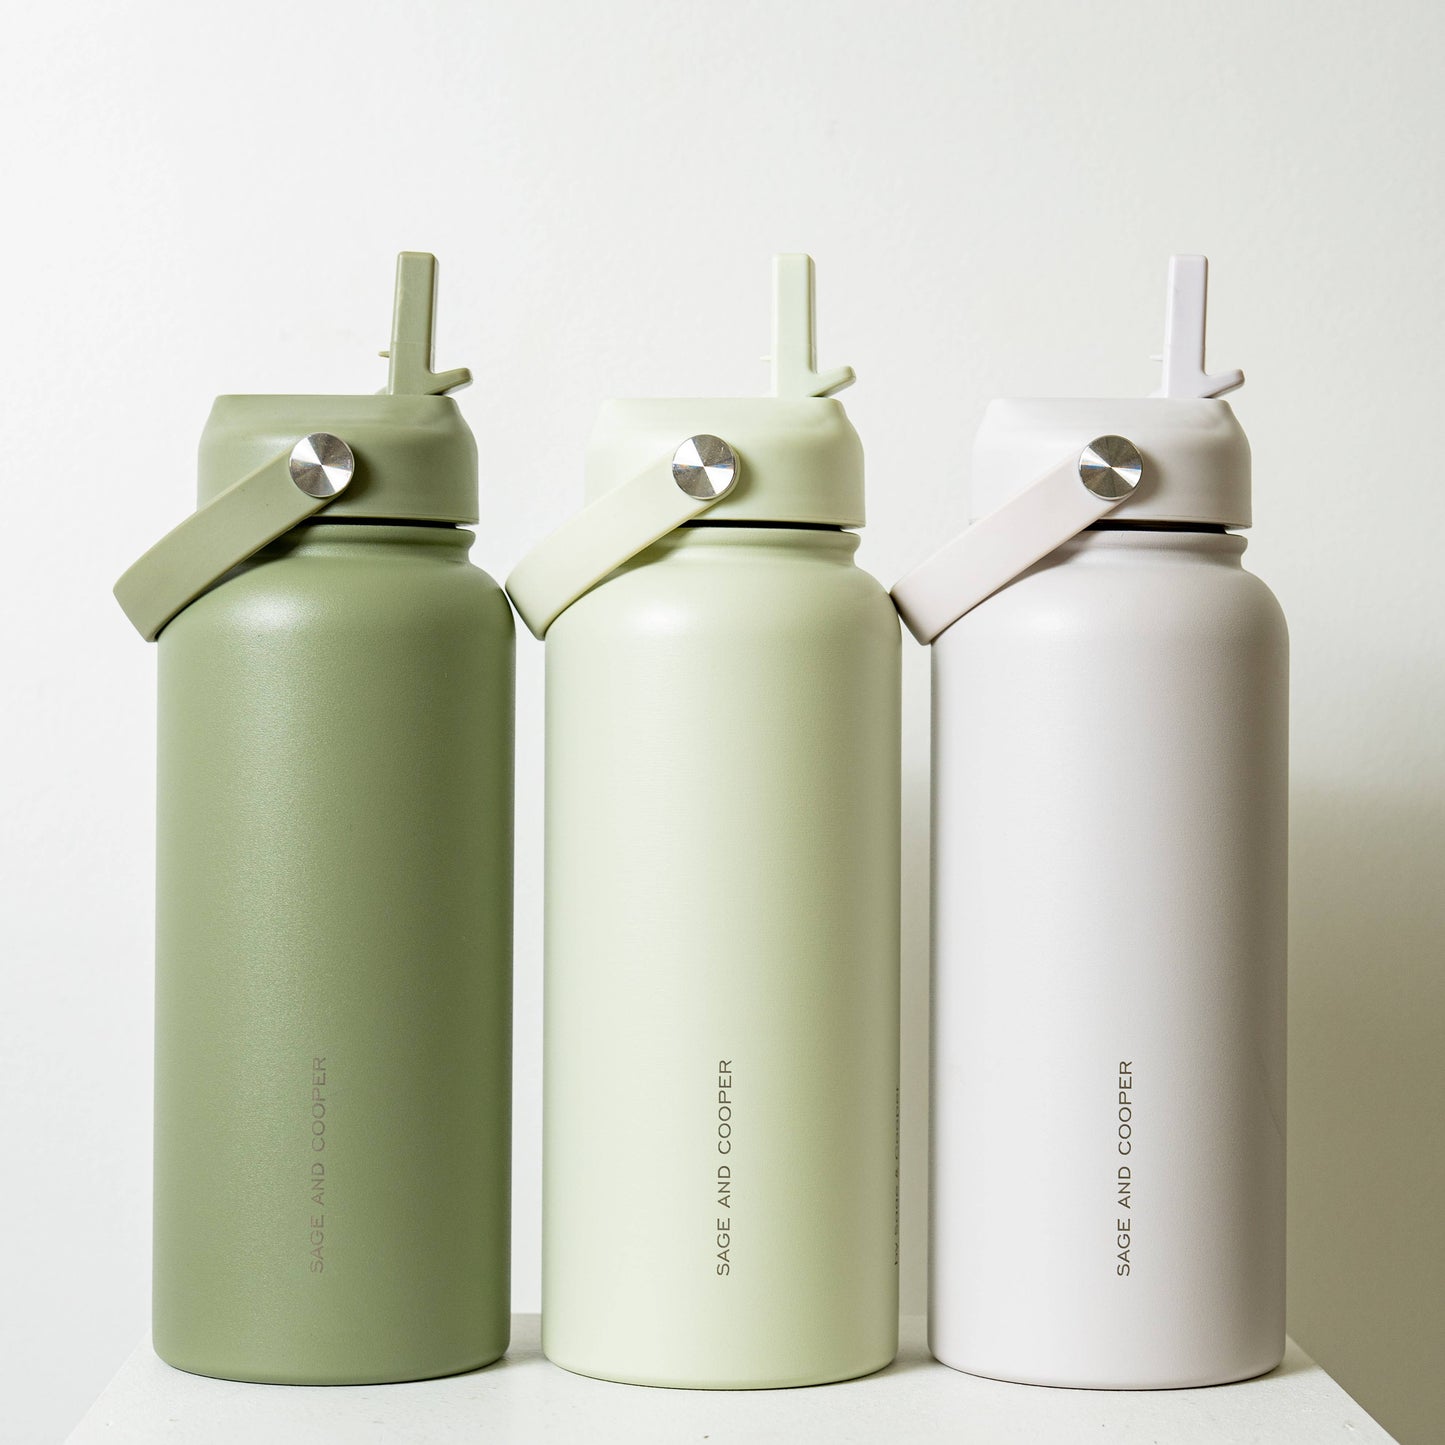 Insulated Drink Bottle